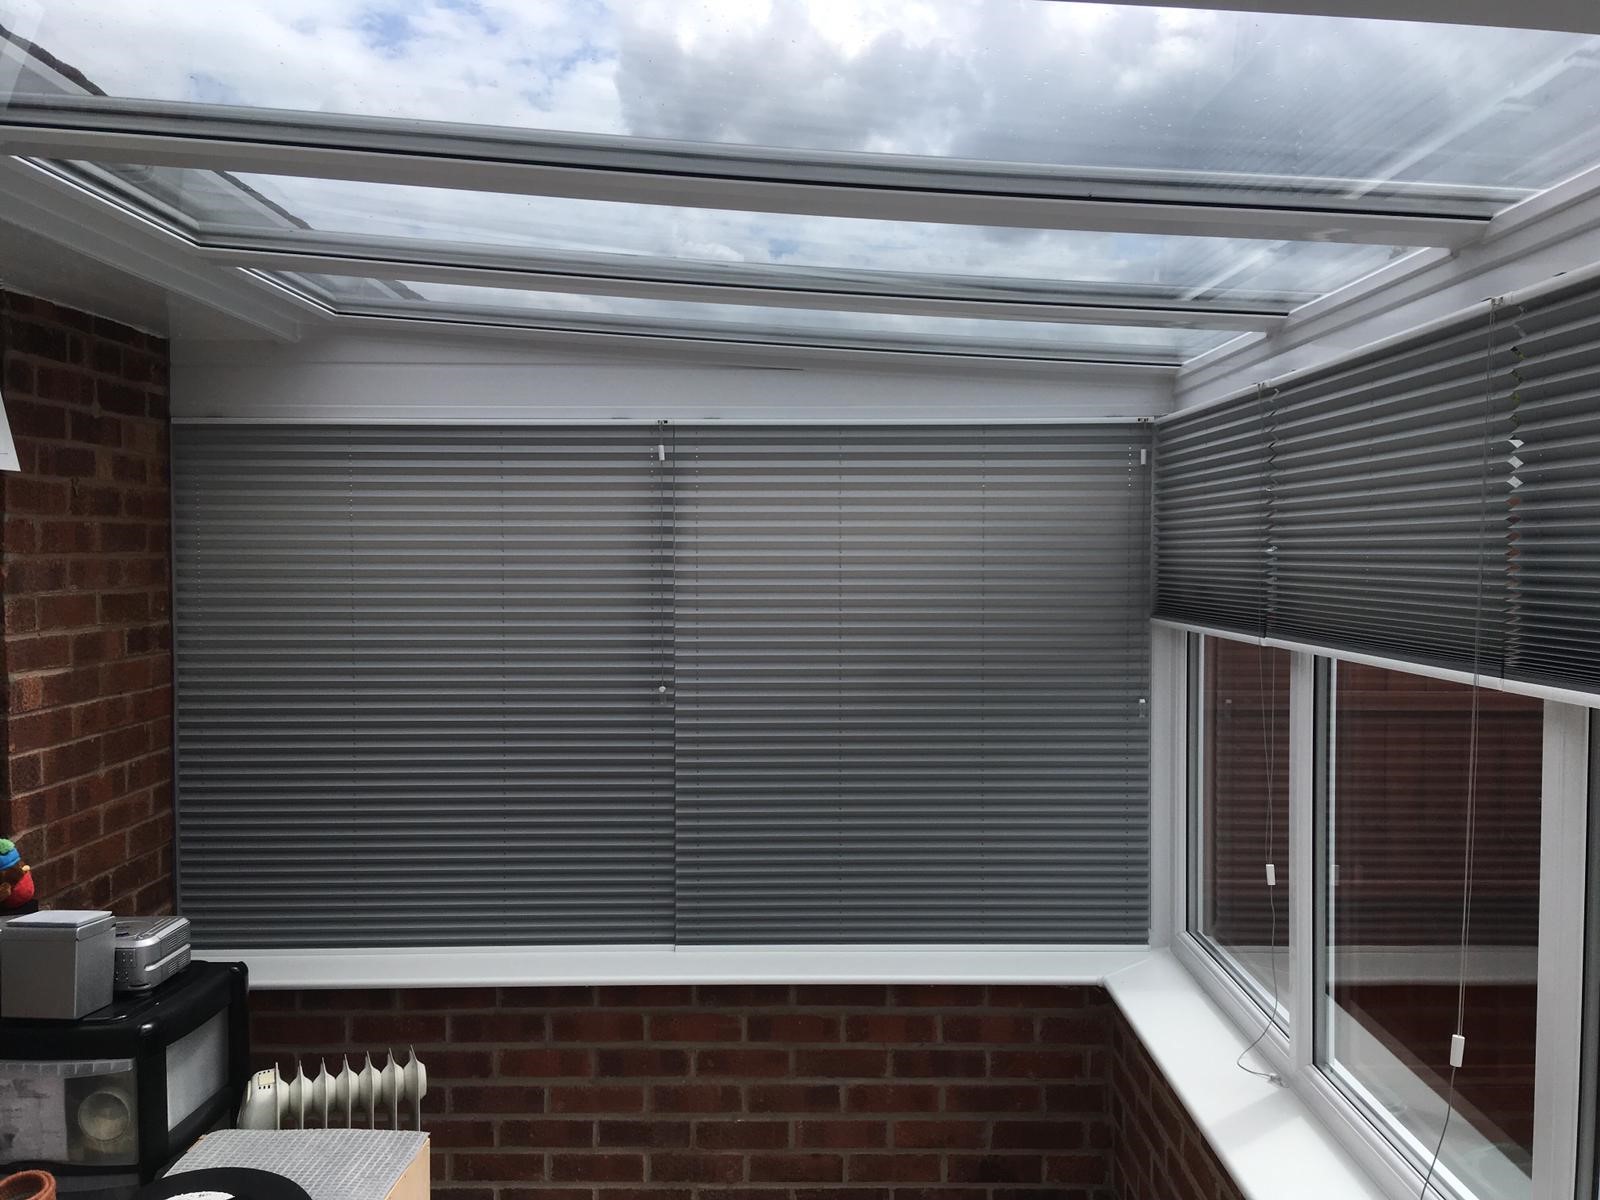 Suppliers of Pleated Blinds For Hot Summers